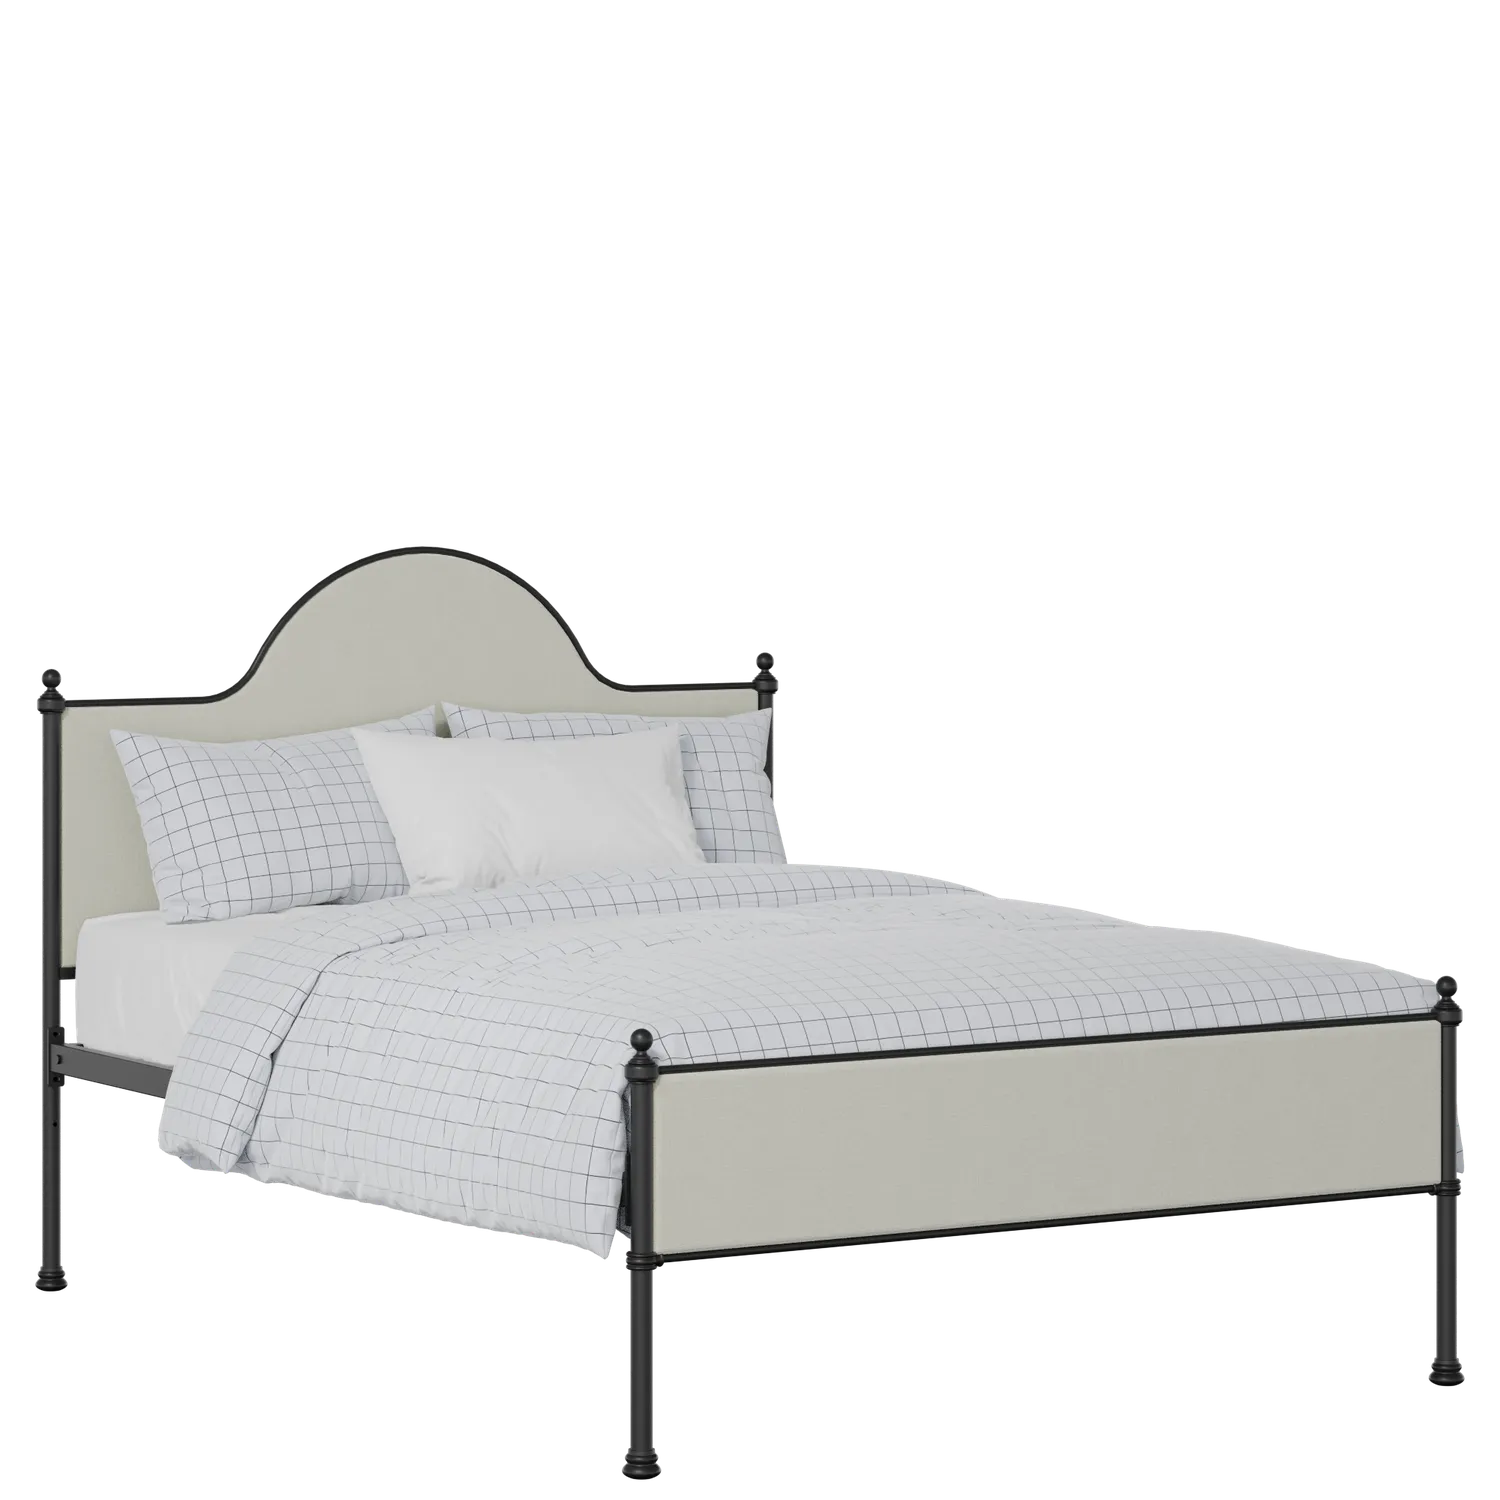 Albert Slim iron/metal upholstered bed in black with oatmeal fabric